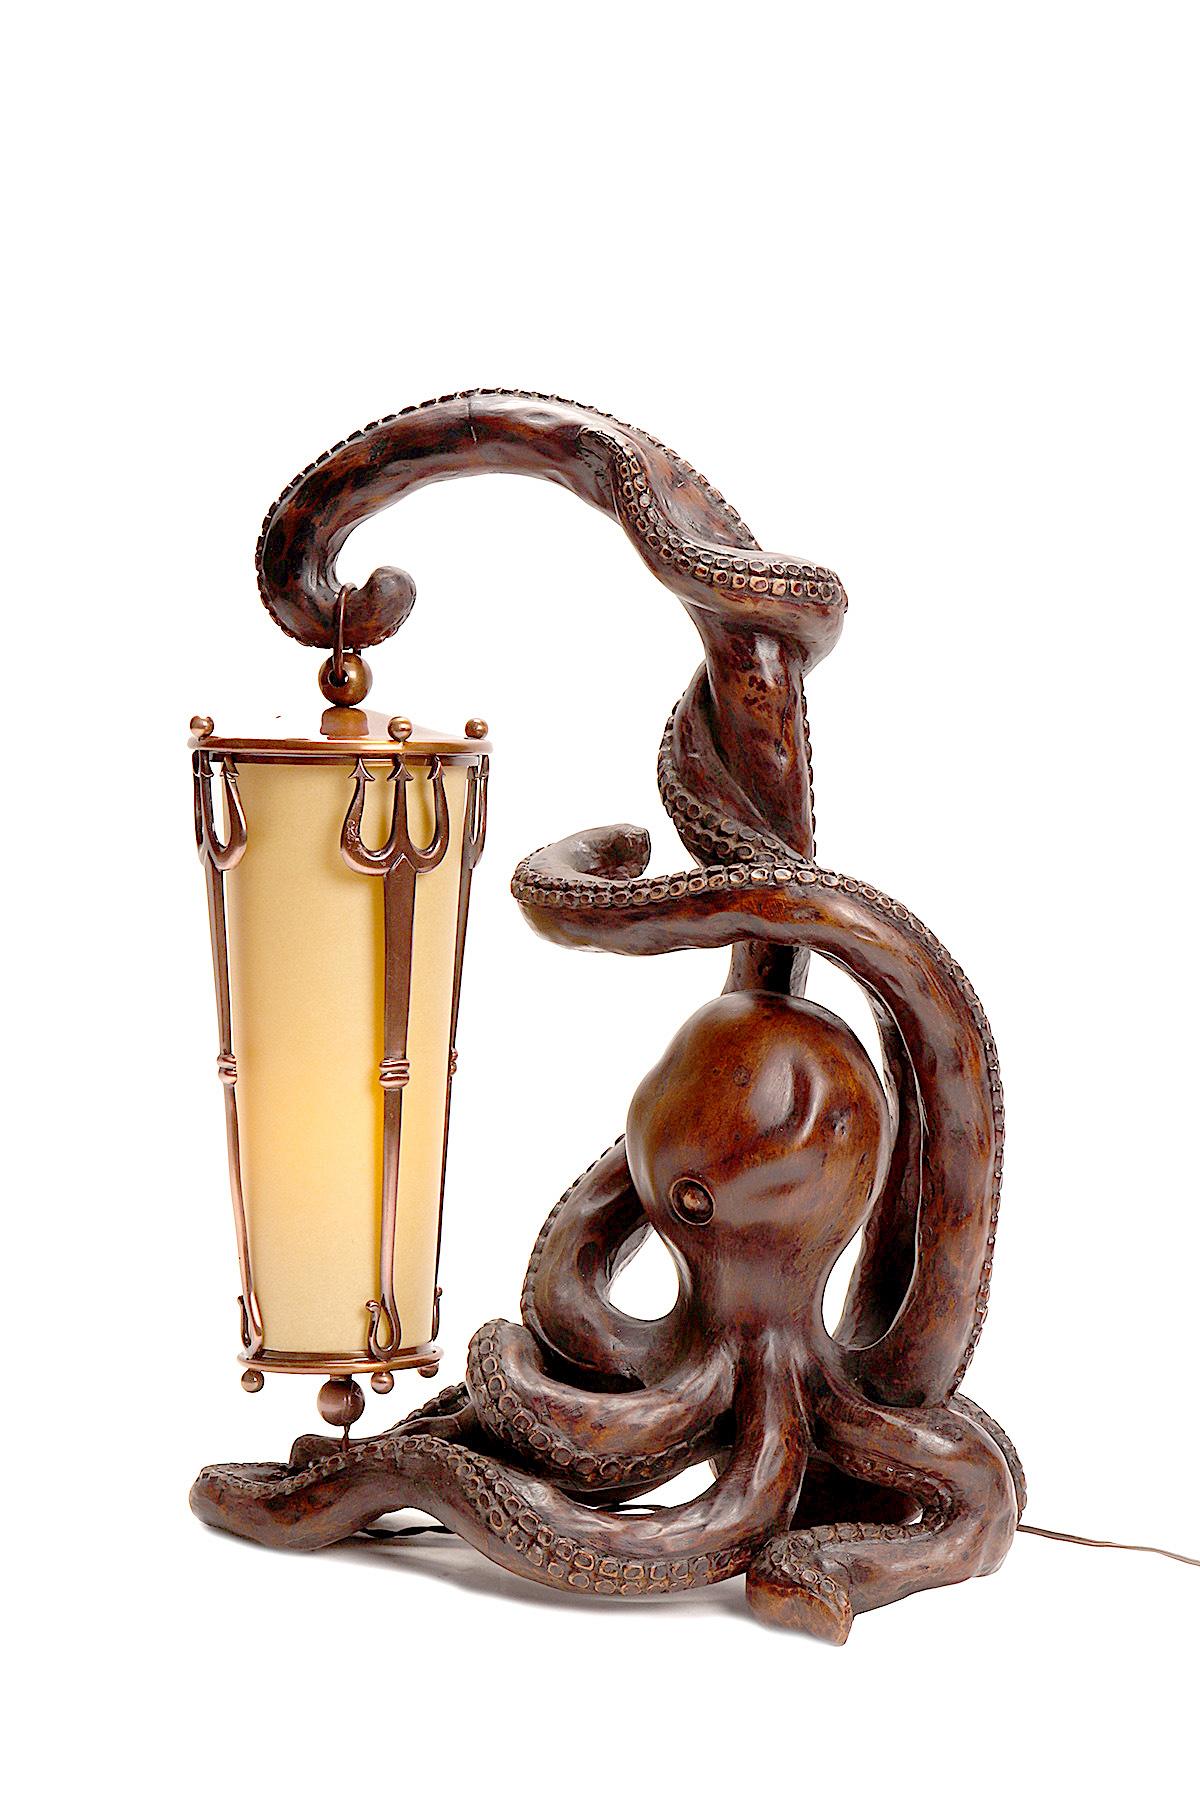 Art Nouveau desk lamp, made out of carved hazel nut wood, depicts an octopus holding a lantern with a tentacle. The lampshade is made of parchment encased by three tridents, made out of copper-plated brass. The socket and switch are in Galalith.